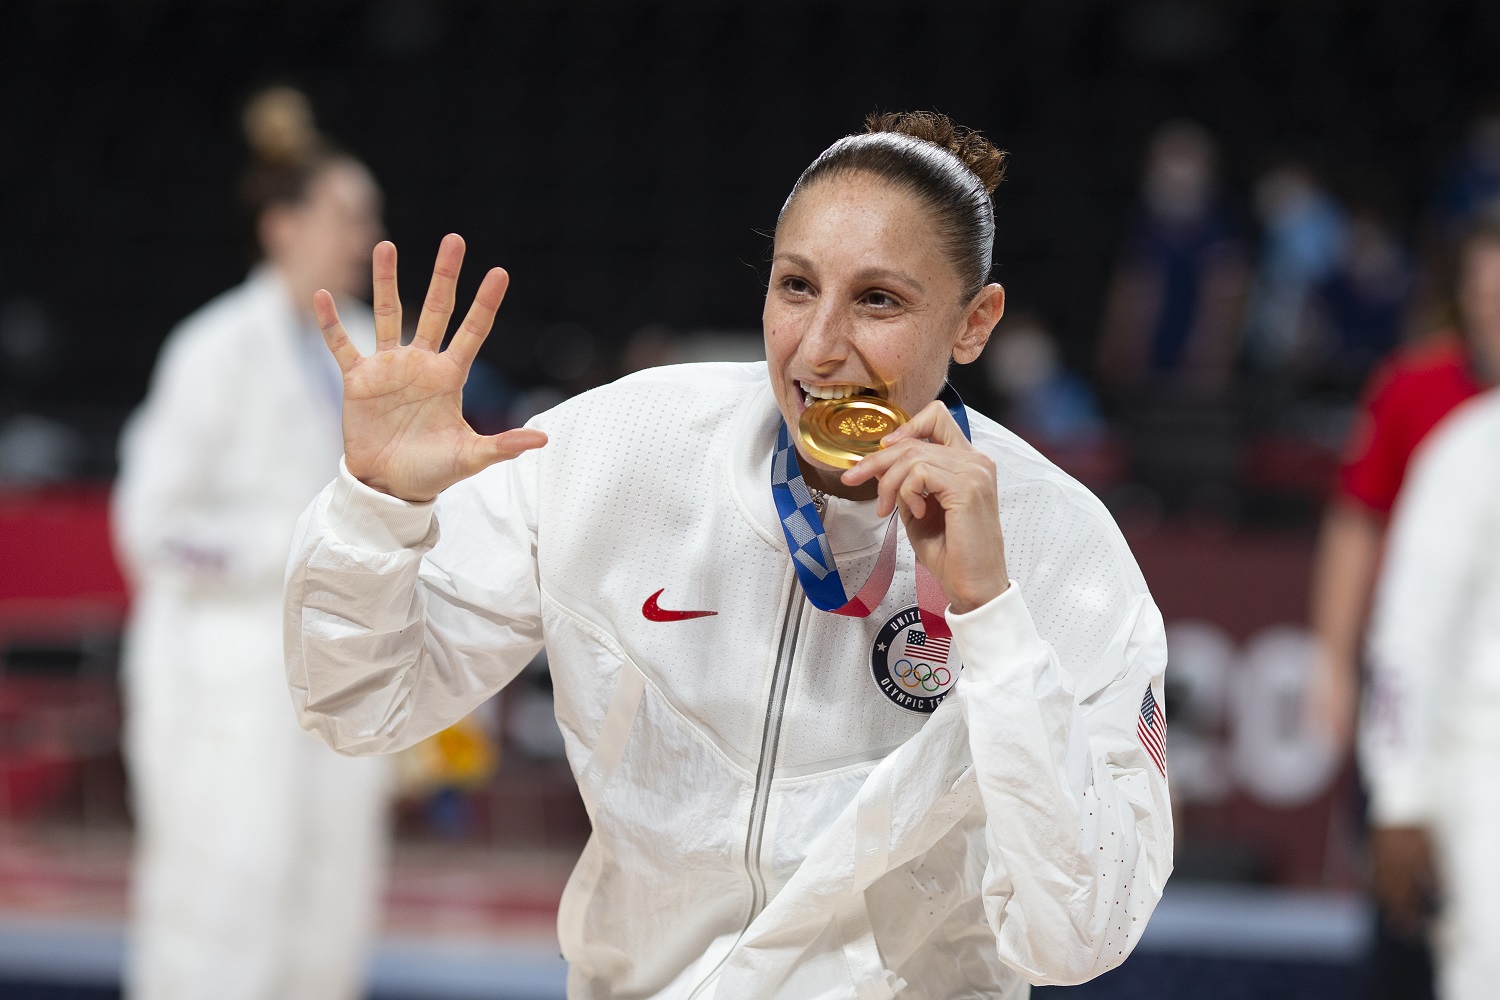 Five-time Olympic gold medalist Diana Taurasi celebrates at the medal presentation after Team USA defeated Japan in the women's basketball final at the Tokyo Olympics. | Tim Clayton/Corbis via Getty Images